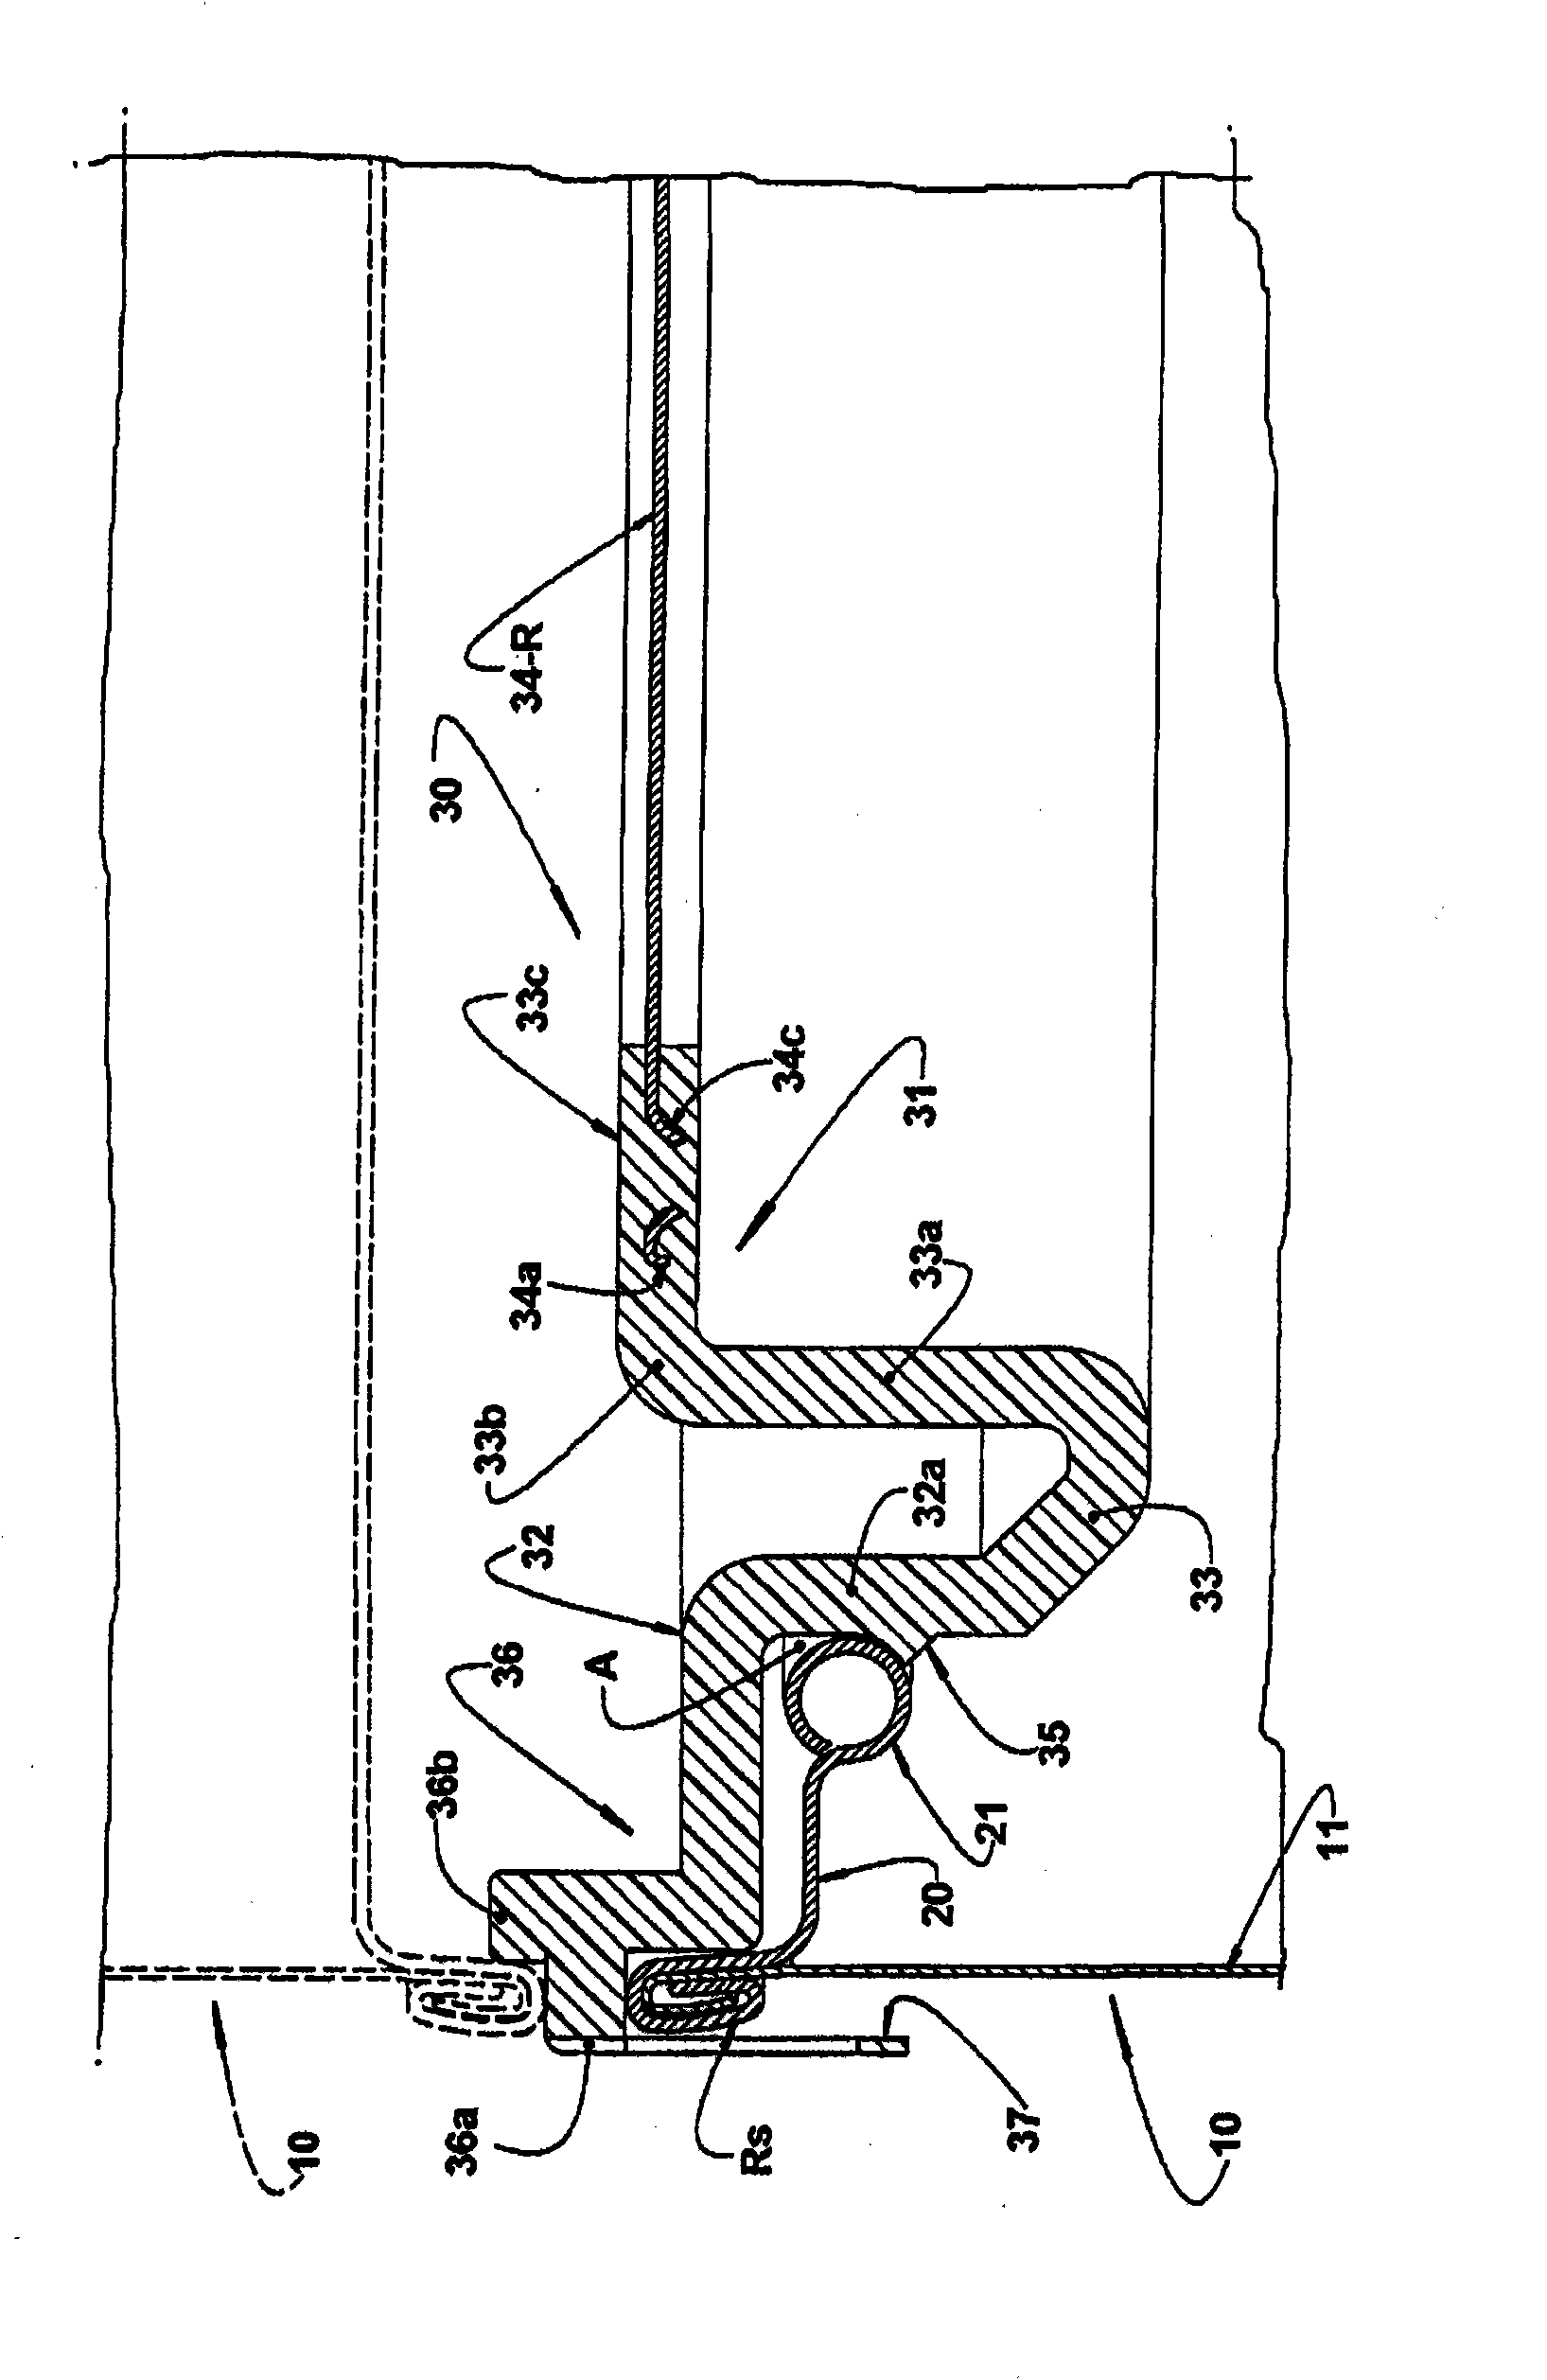 Packaging system with an overcap